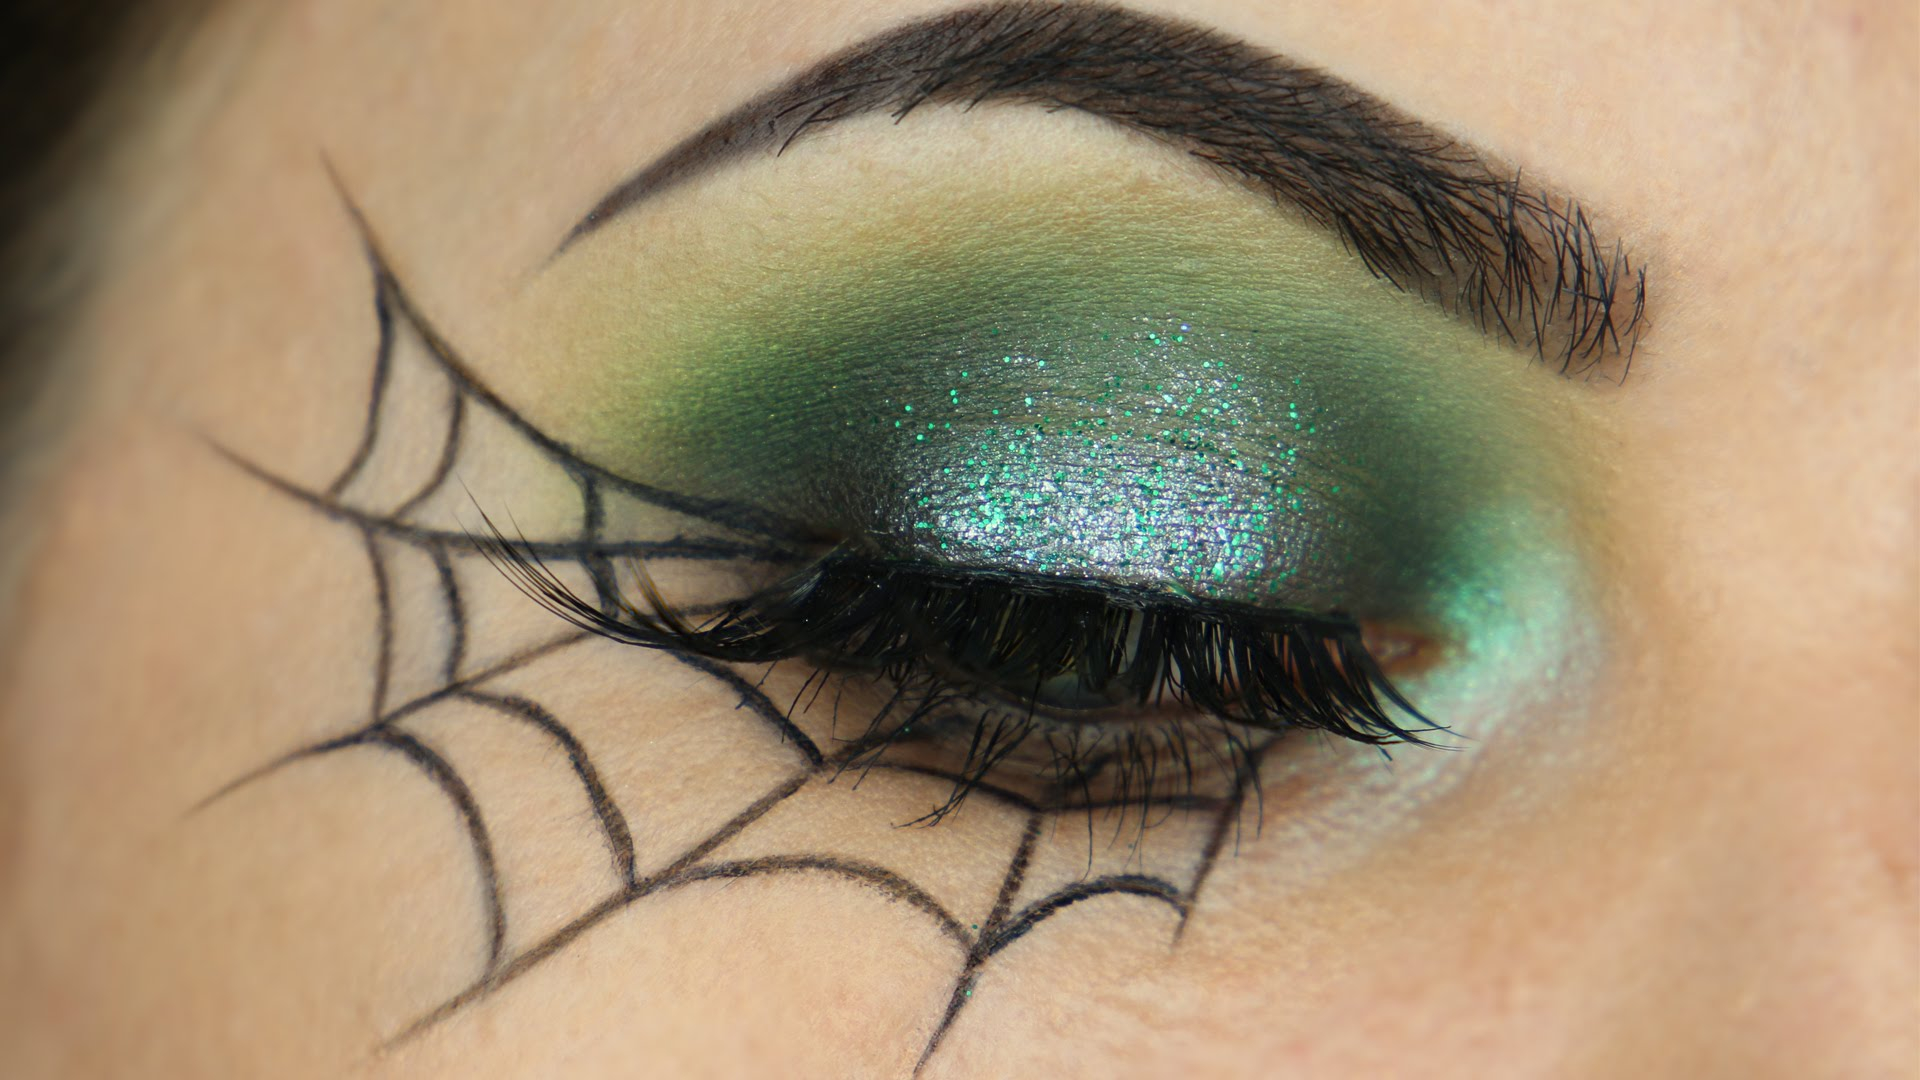 Eye Makeup For Halloween Halloween Eye Makeup To Try Out This Year